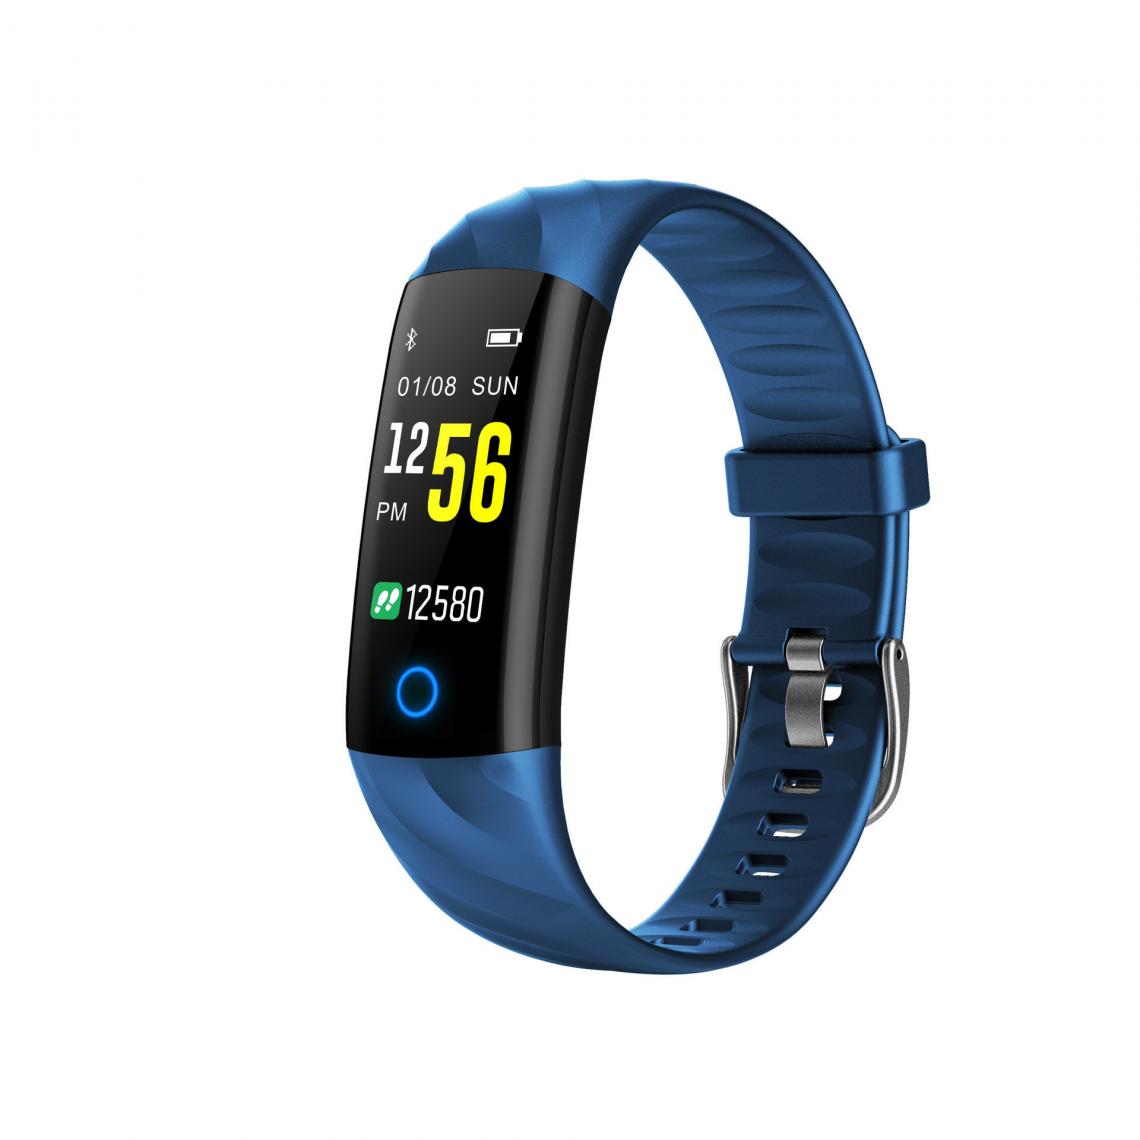 Chronotech Montres - Chronus Smart Watch IP68 Waterproof Activity Tracker with Heart Rate Monitor Step Calories Counter Sleep Pedometer Watch (Blue) - Montre connectée